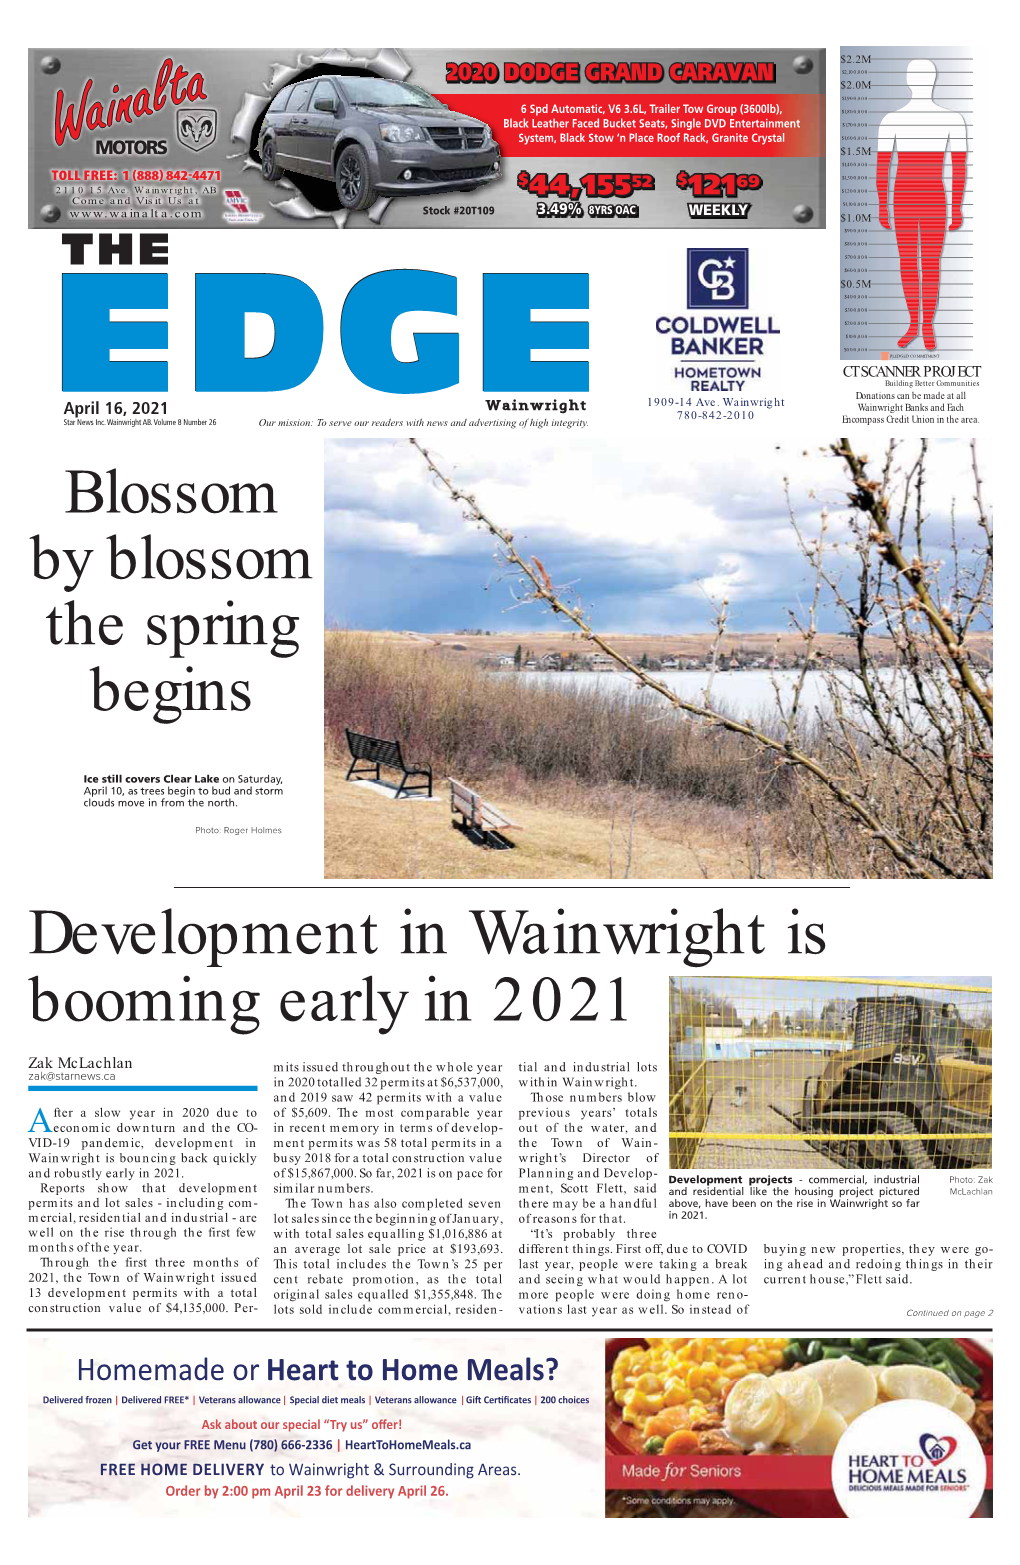 Development in Wainwright Is Booming Early in 2021